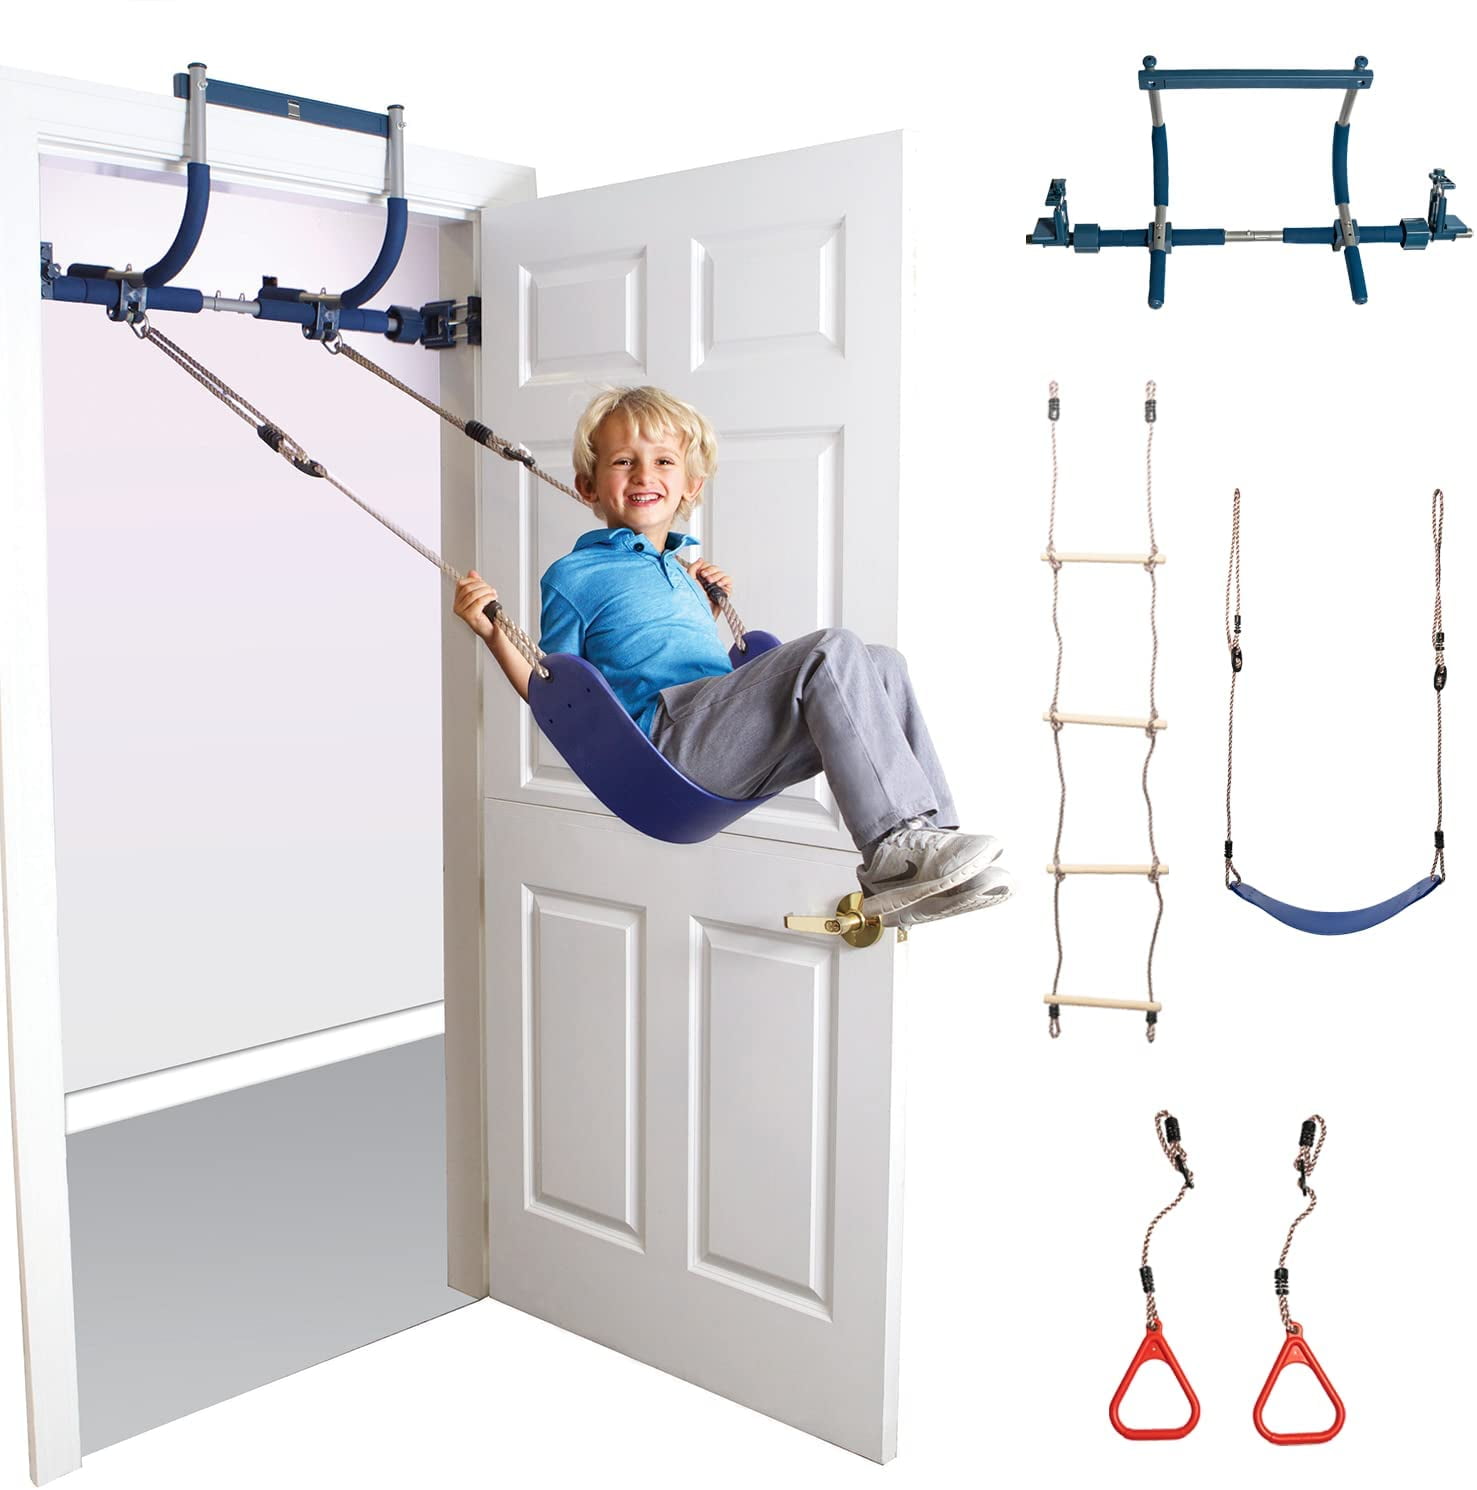 Gym1 Deluxe Indoor Playground With Swing Ladder Rings Trapeze Bar and Rope for sale online 